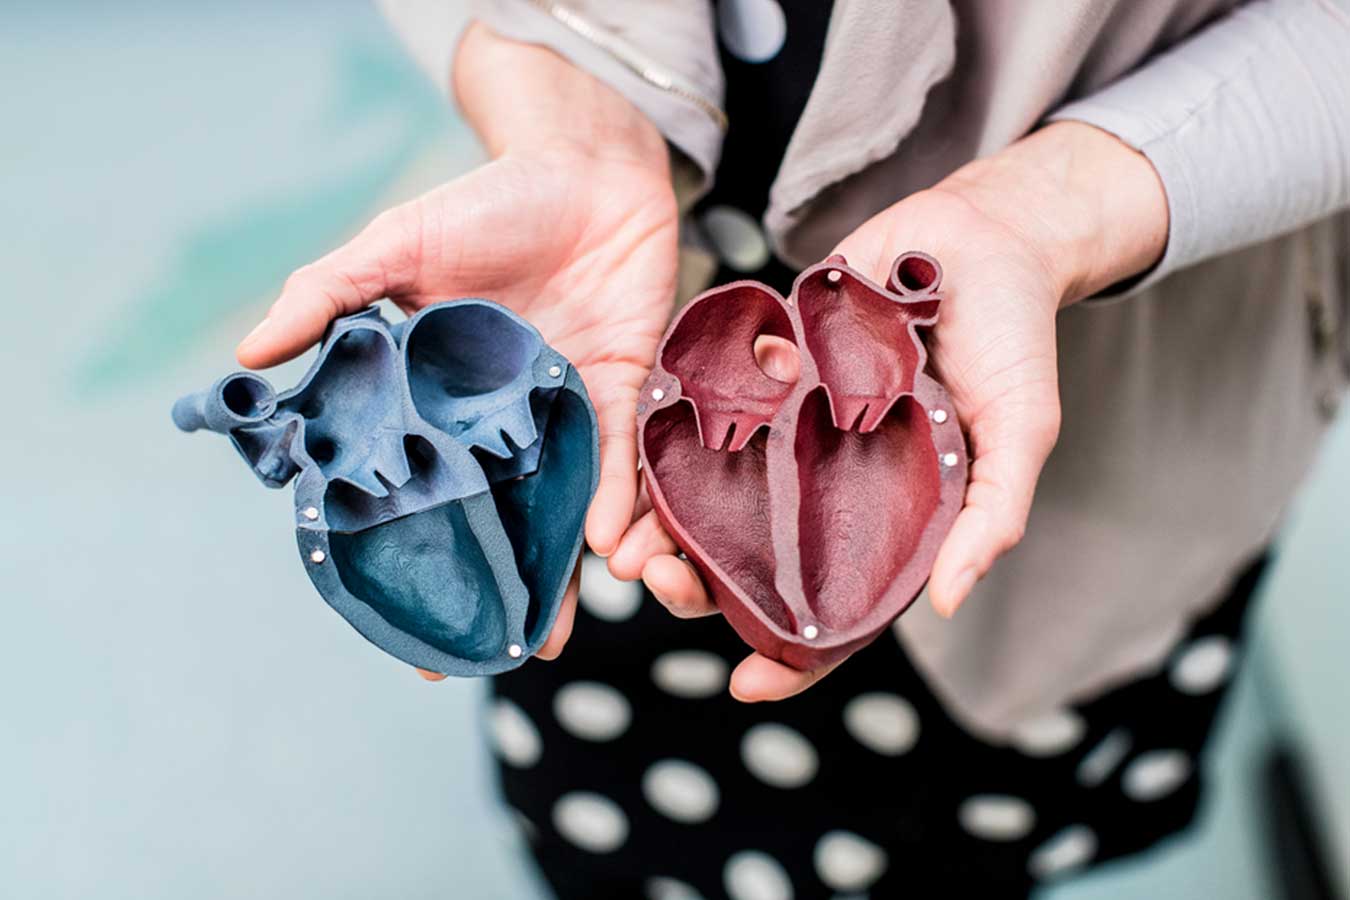 3D model of a heart in two halves